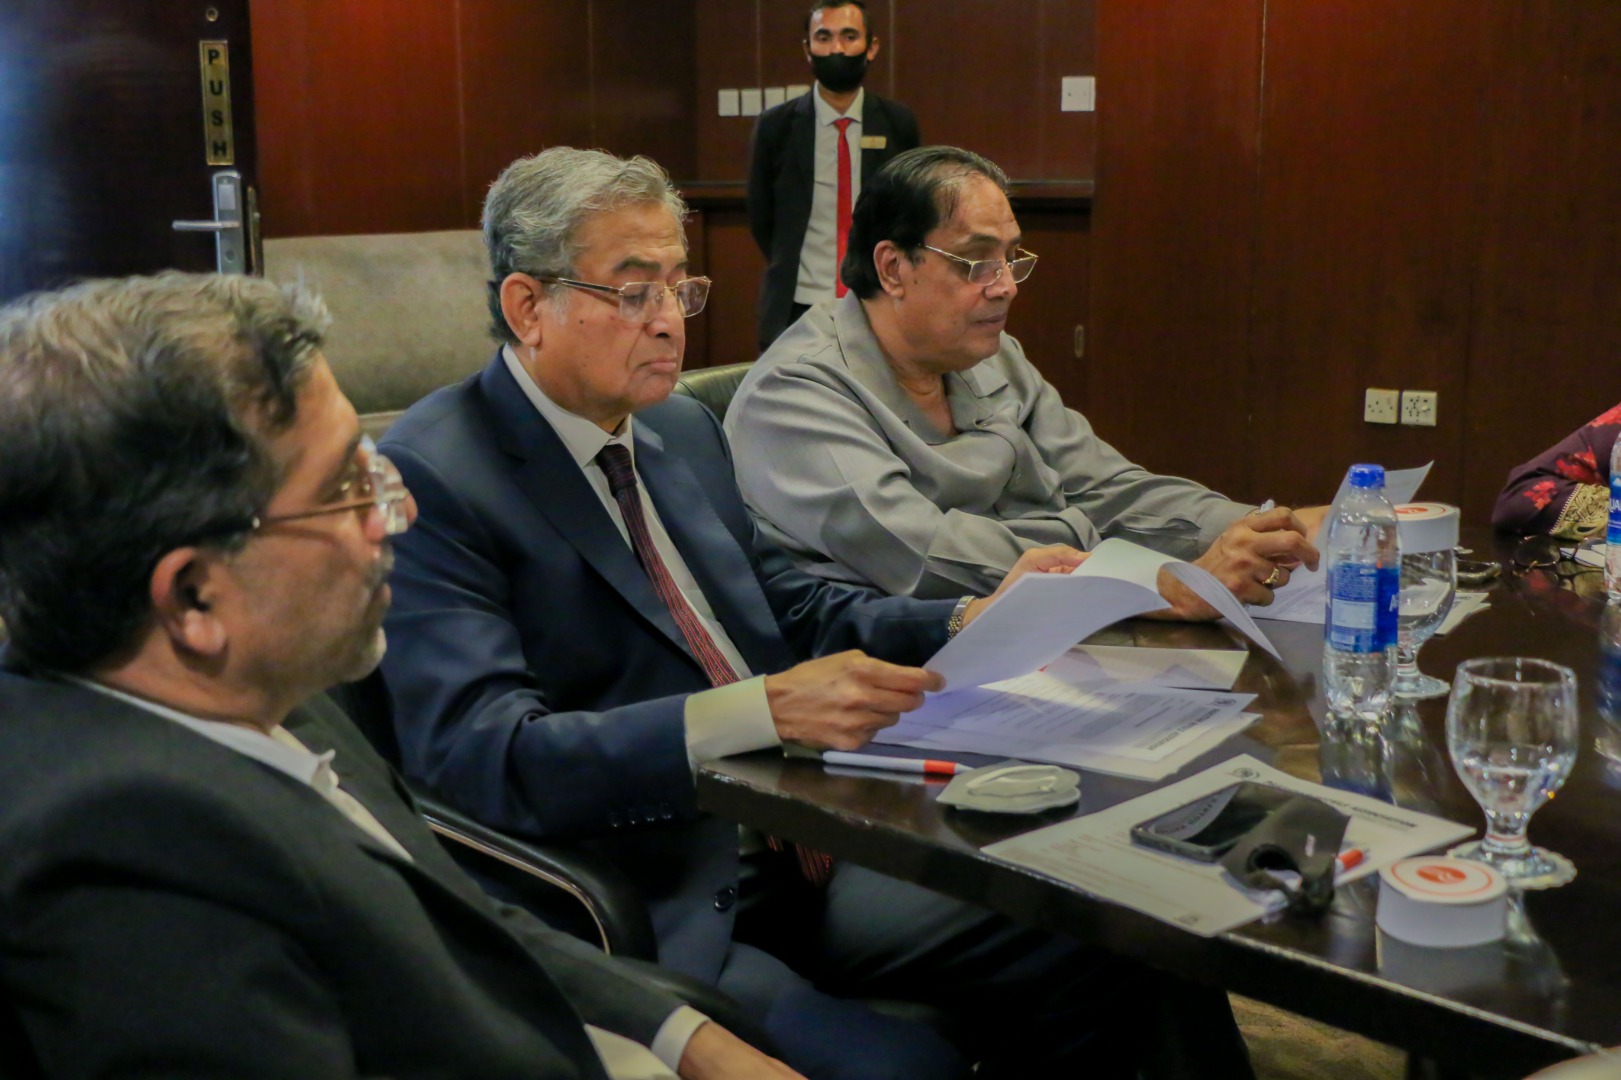 The Executive Committee Meeting of PHA was held on 2nd March, 2022 at Ramada Plaza Hotel Karachi